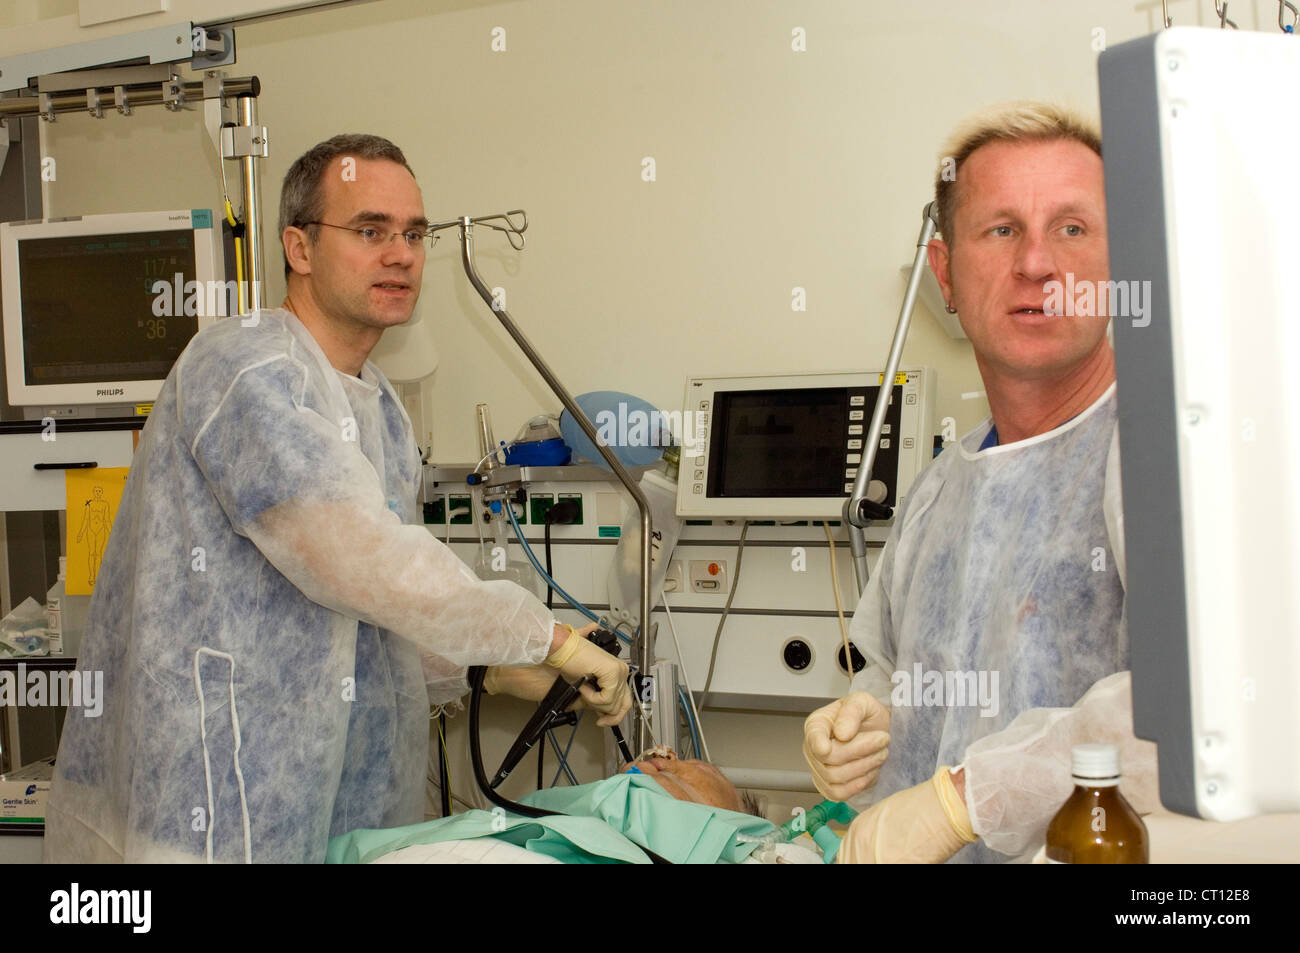 Surgeons using an endoscope to visually examine a patient's internal organs on a television monitor. Stock Photo